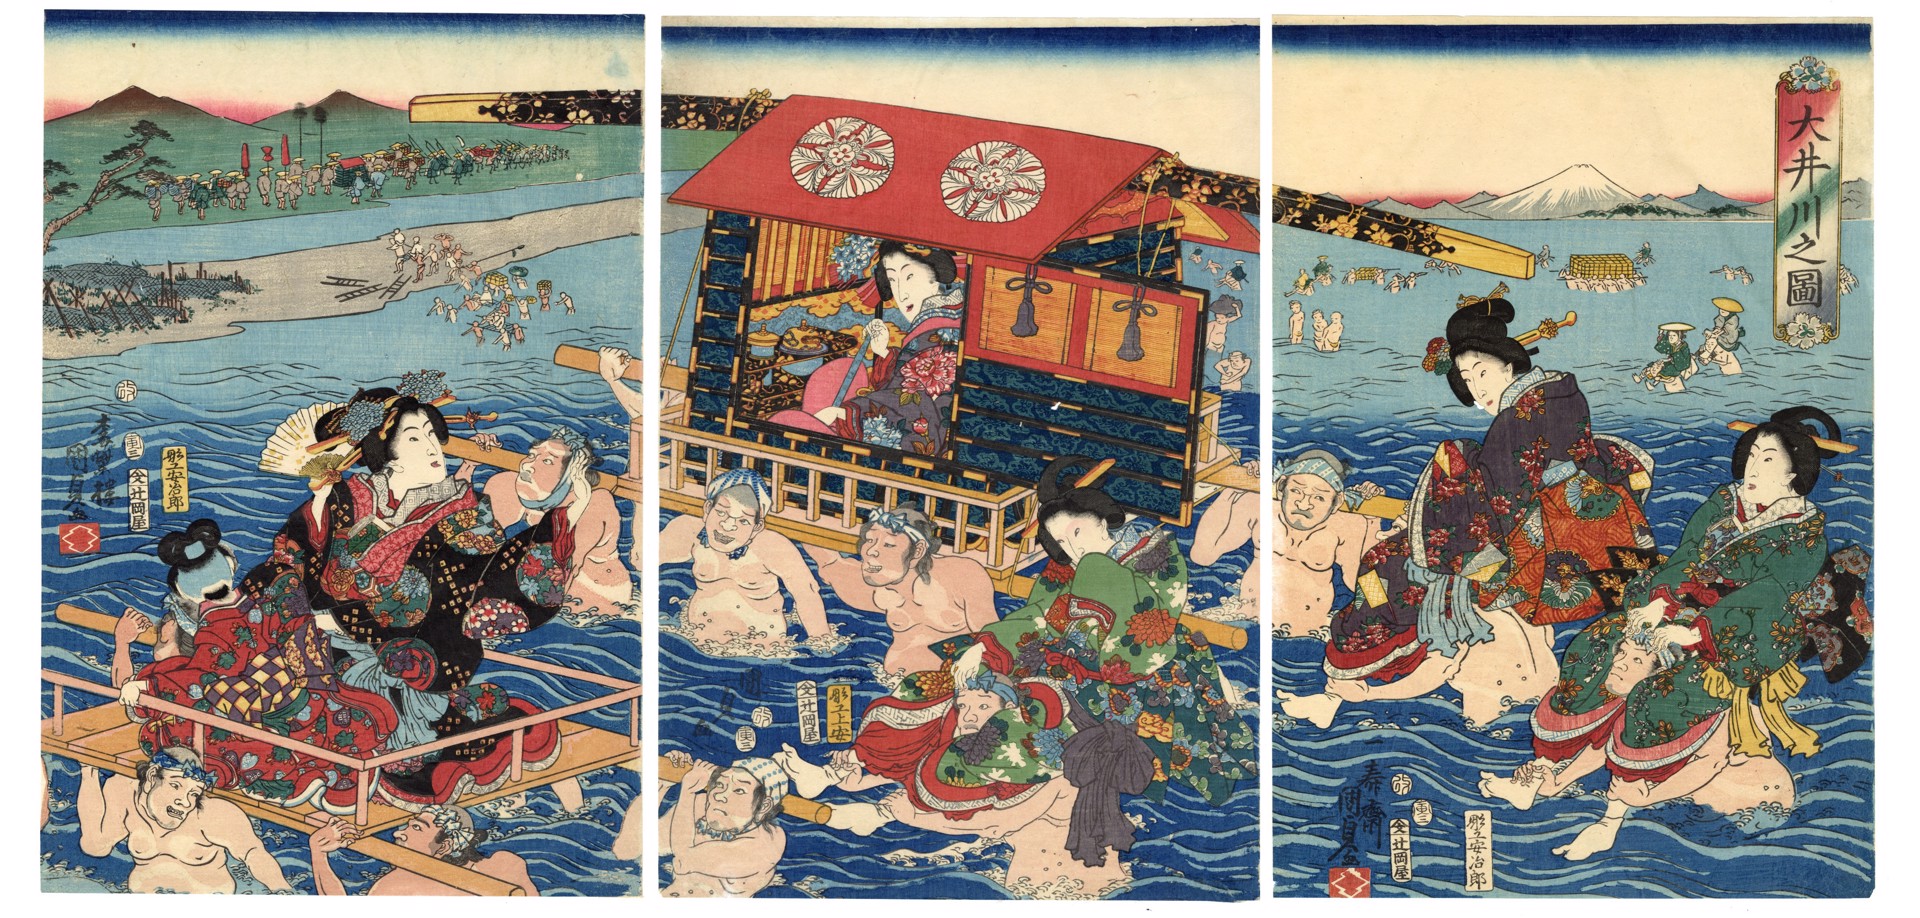 Crossing the Oi River on a Palanquin by Kunisada